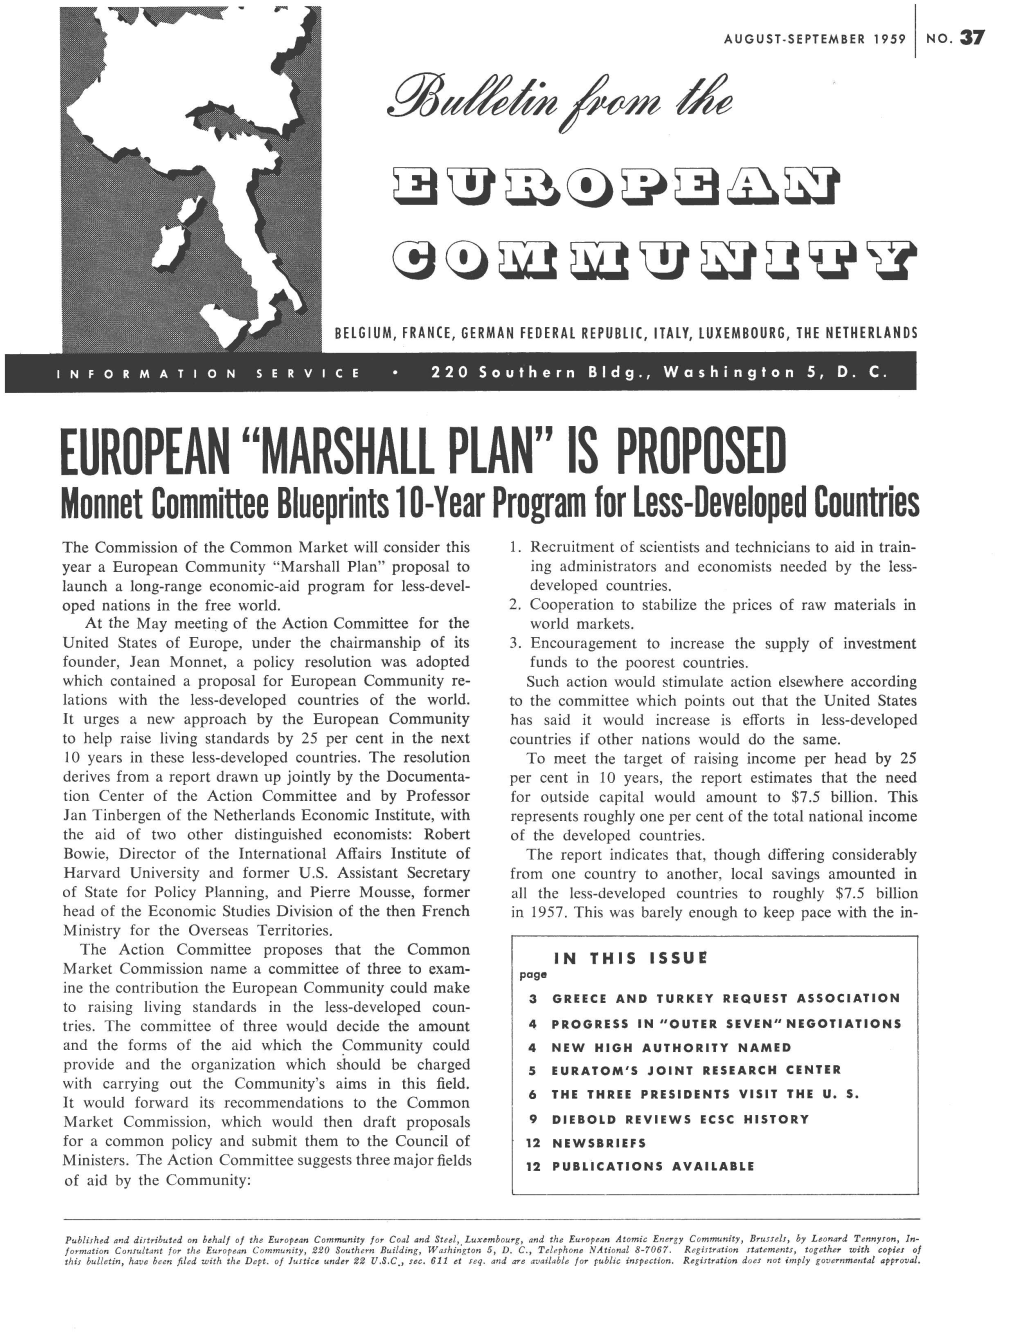 EUROPEAN "MARSHALL PLAN" IS PROPOSED Monnet Committee Blueprints 10-Year Program for Less-Developed Countries the Commission of the Common Market Will Consider This 1